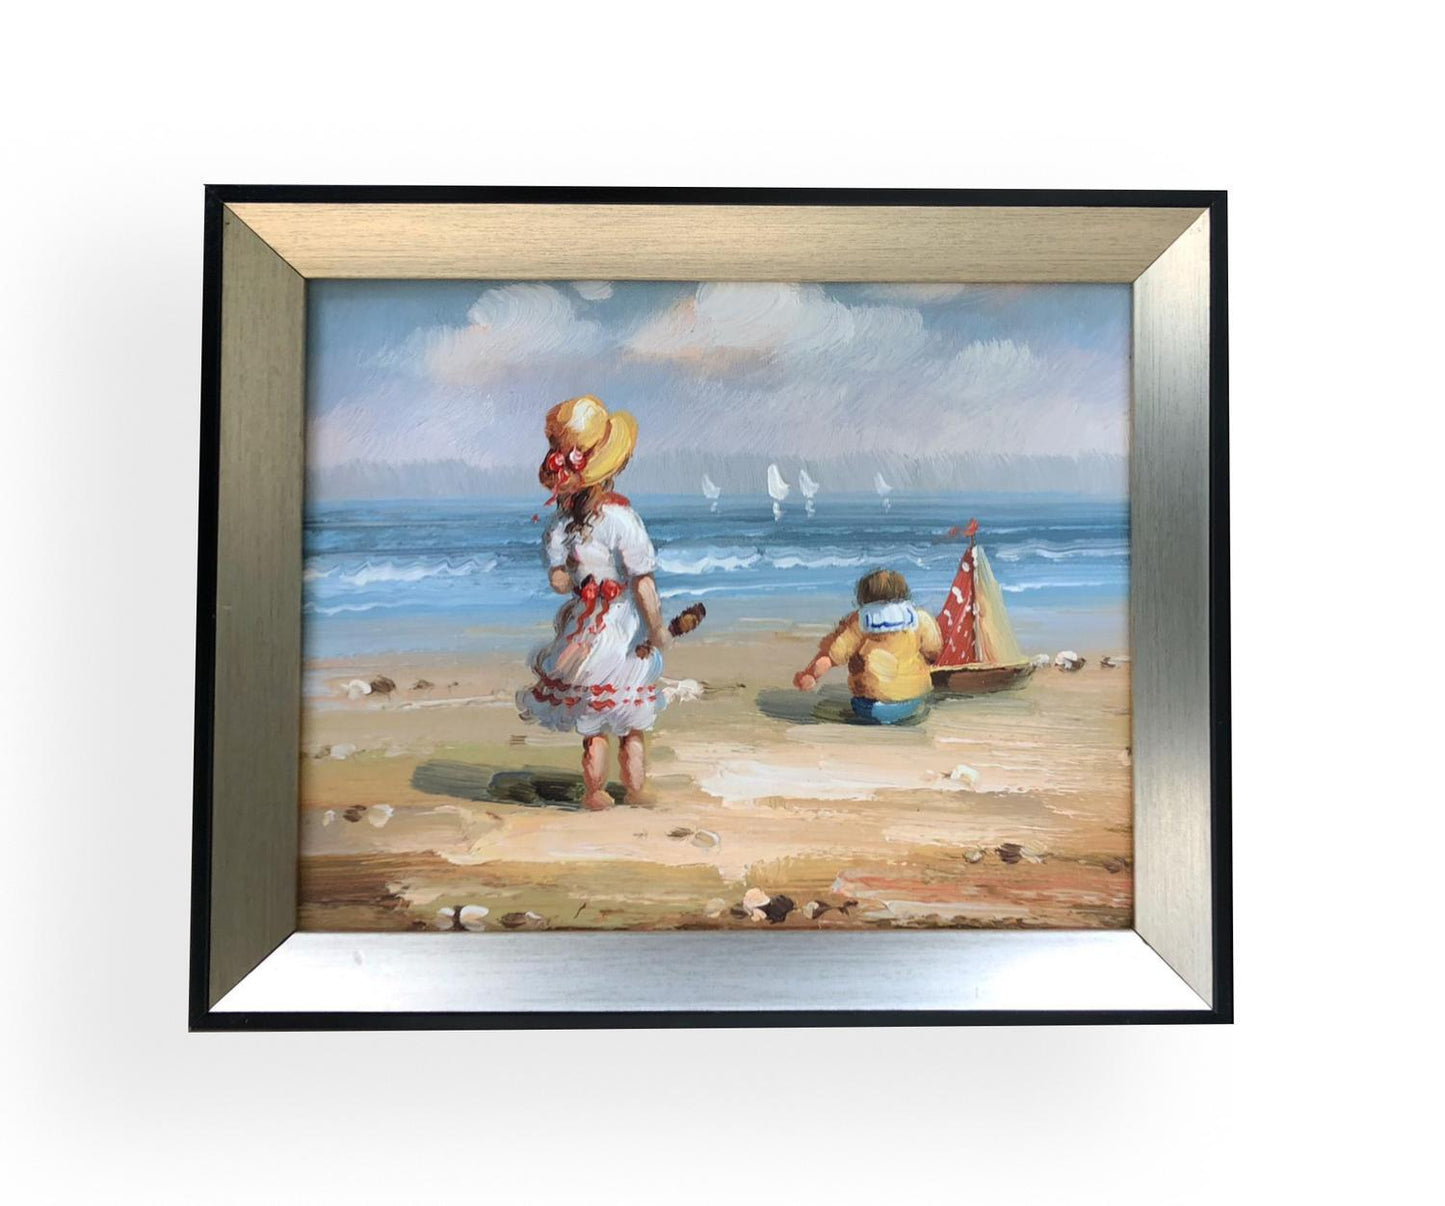 Children play on beach with fantastic frame, inner size 20x25 cm